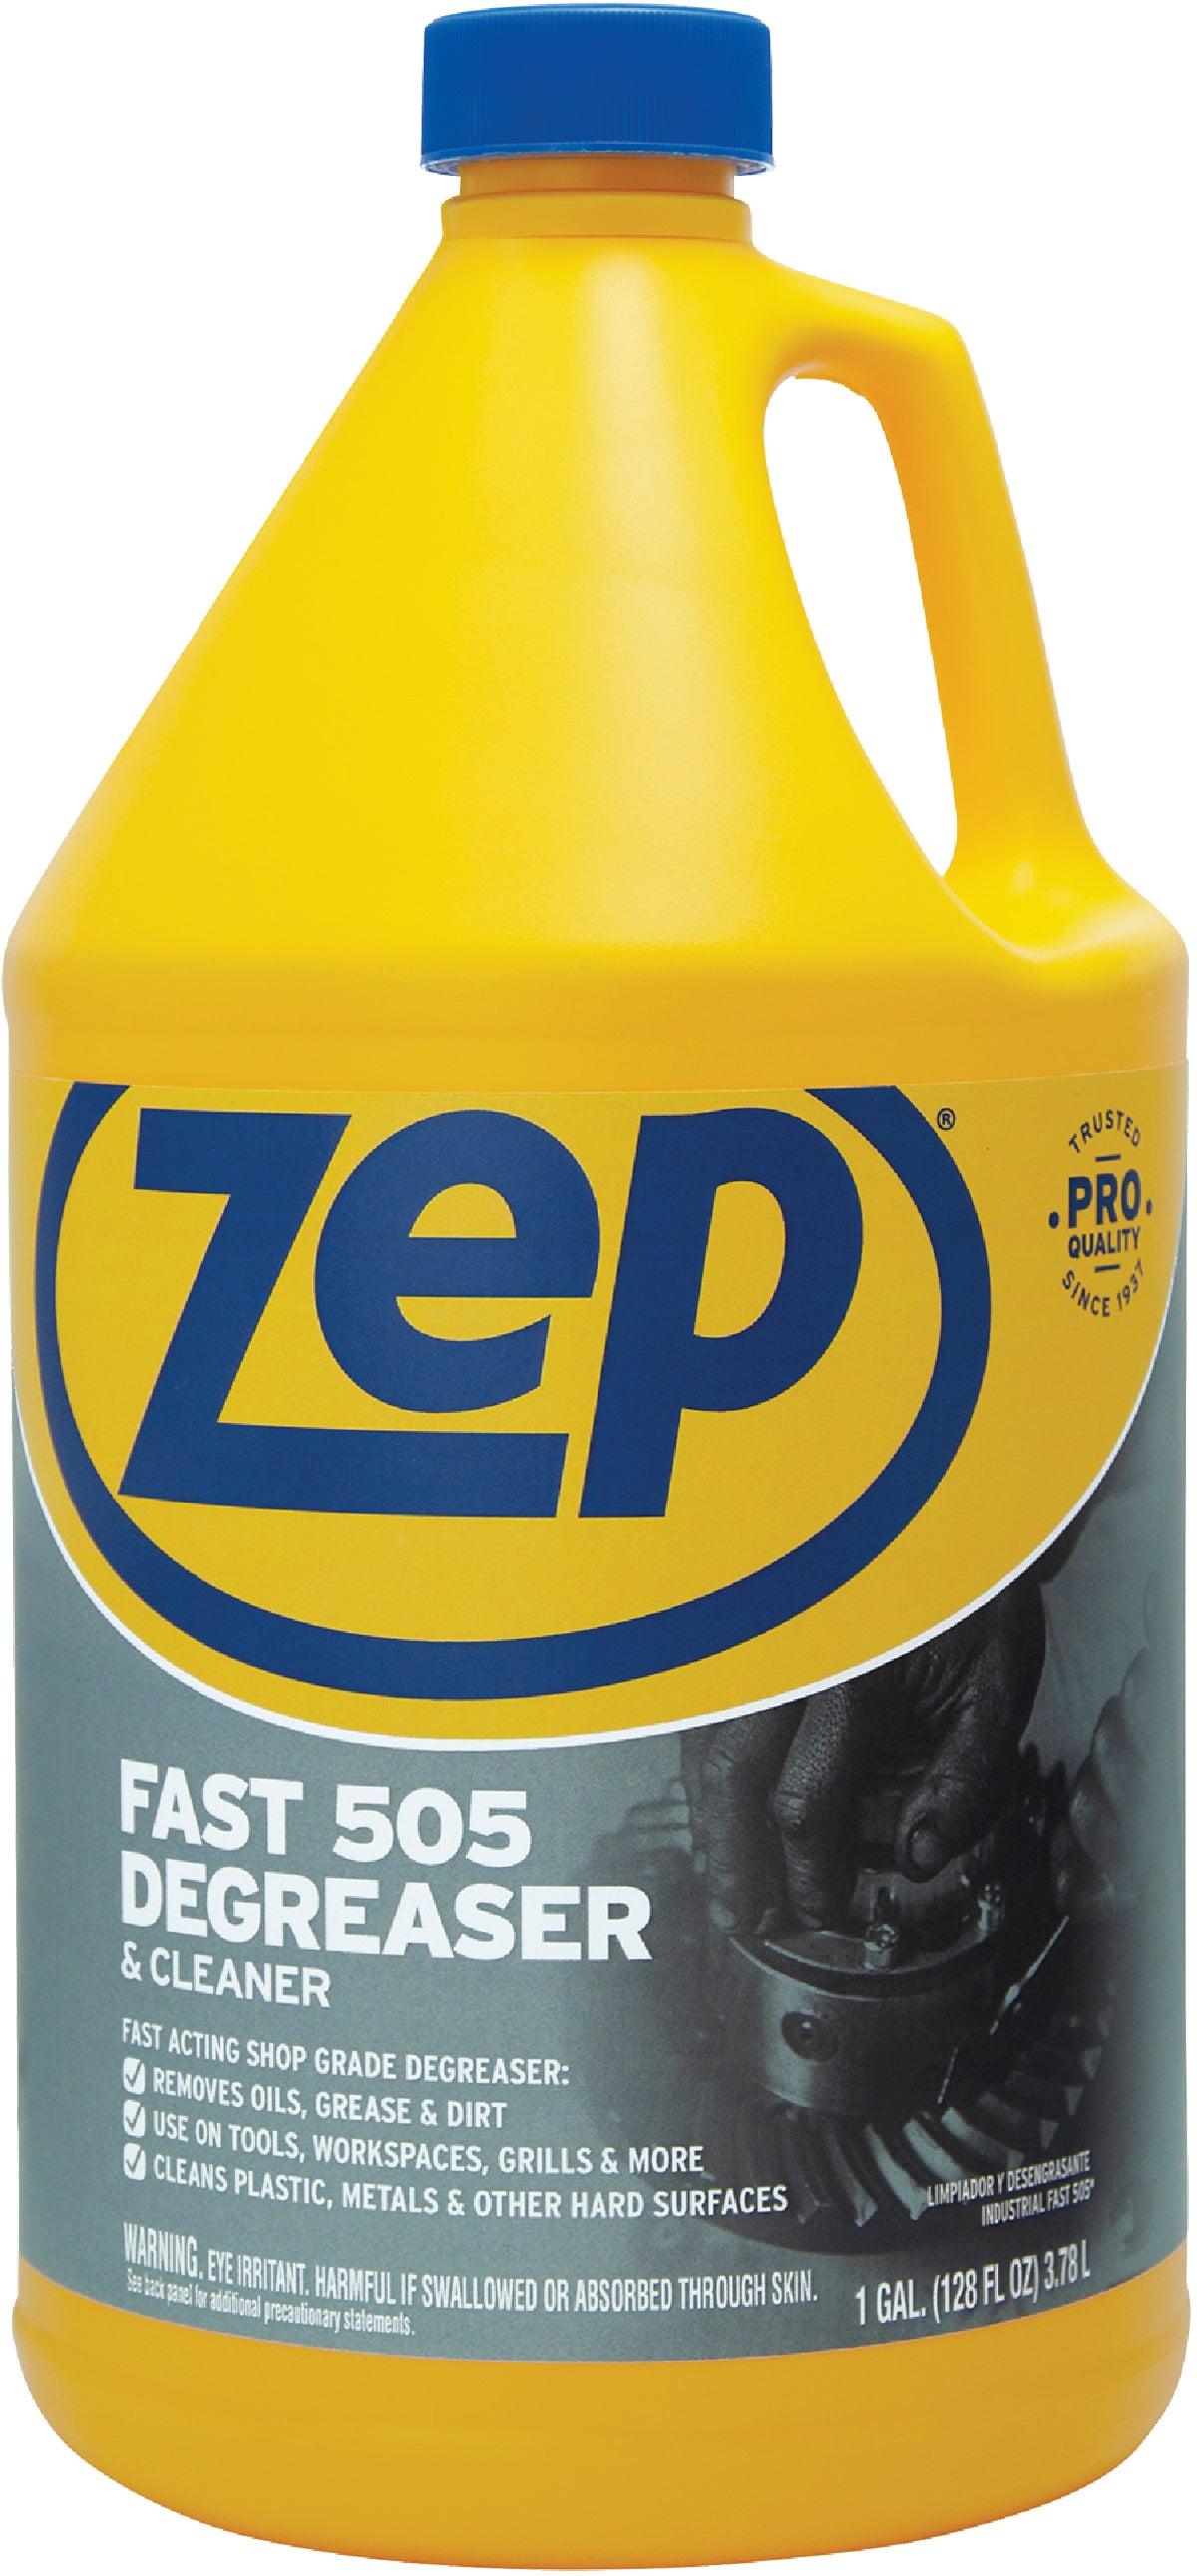 Zep Fast 505 128-fl oz Degreaser (4-Pack) in the Degreasers